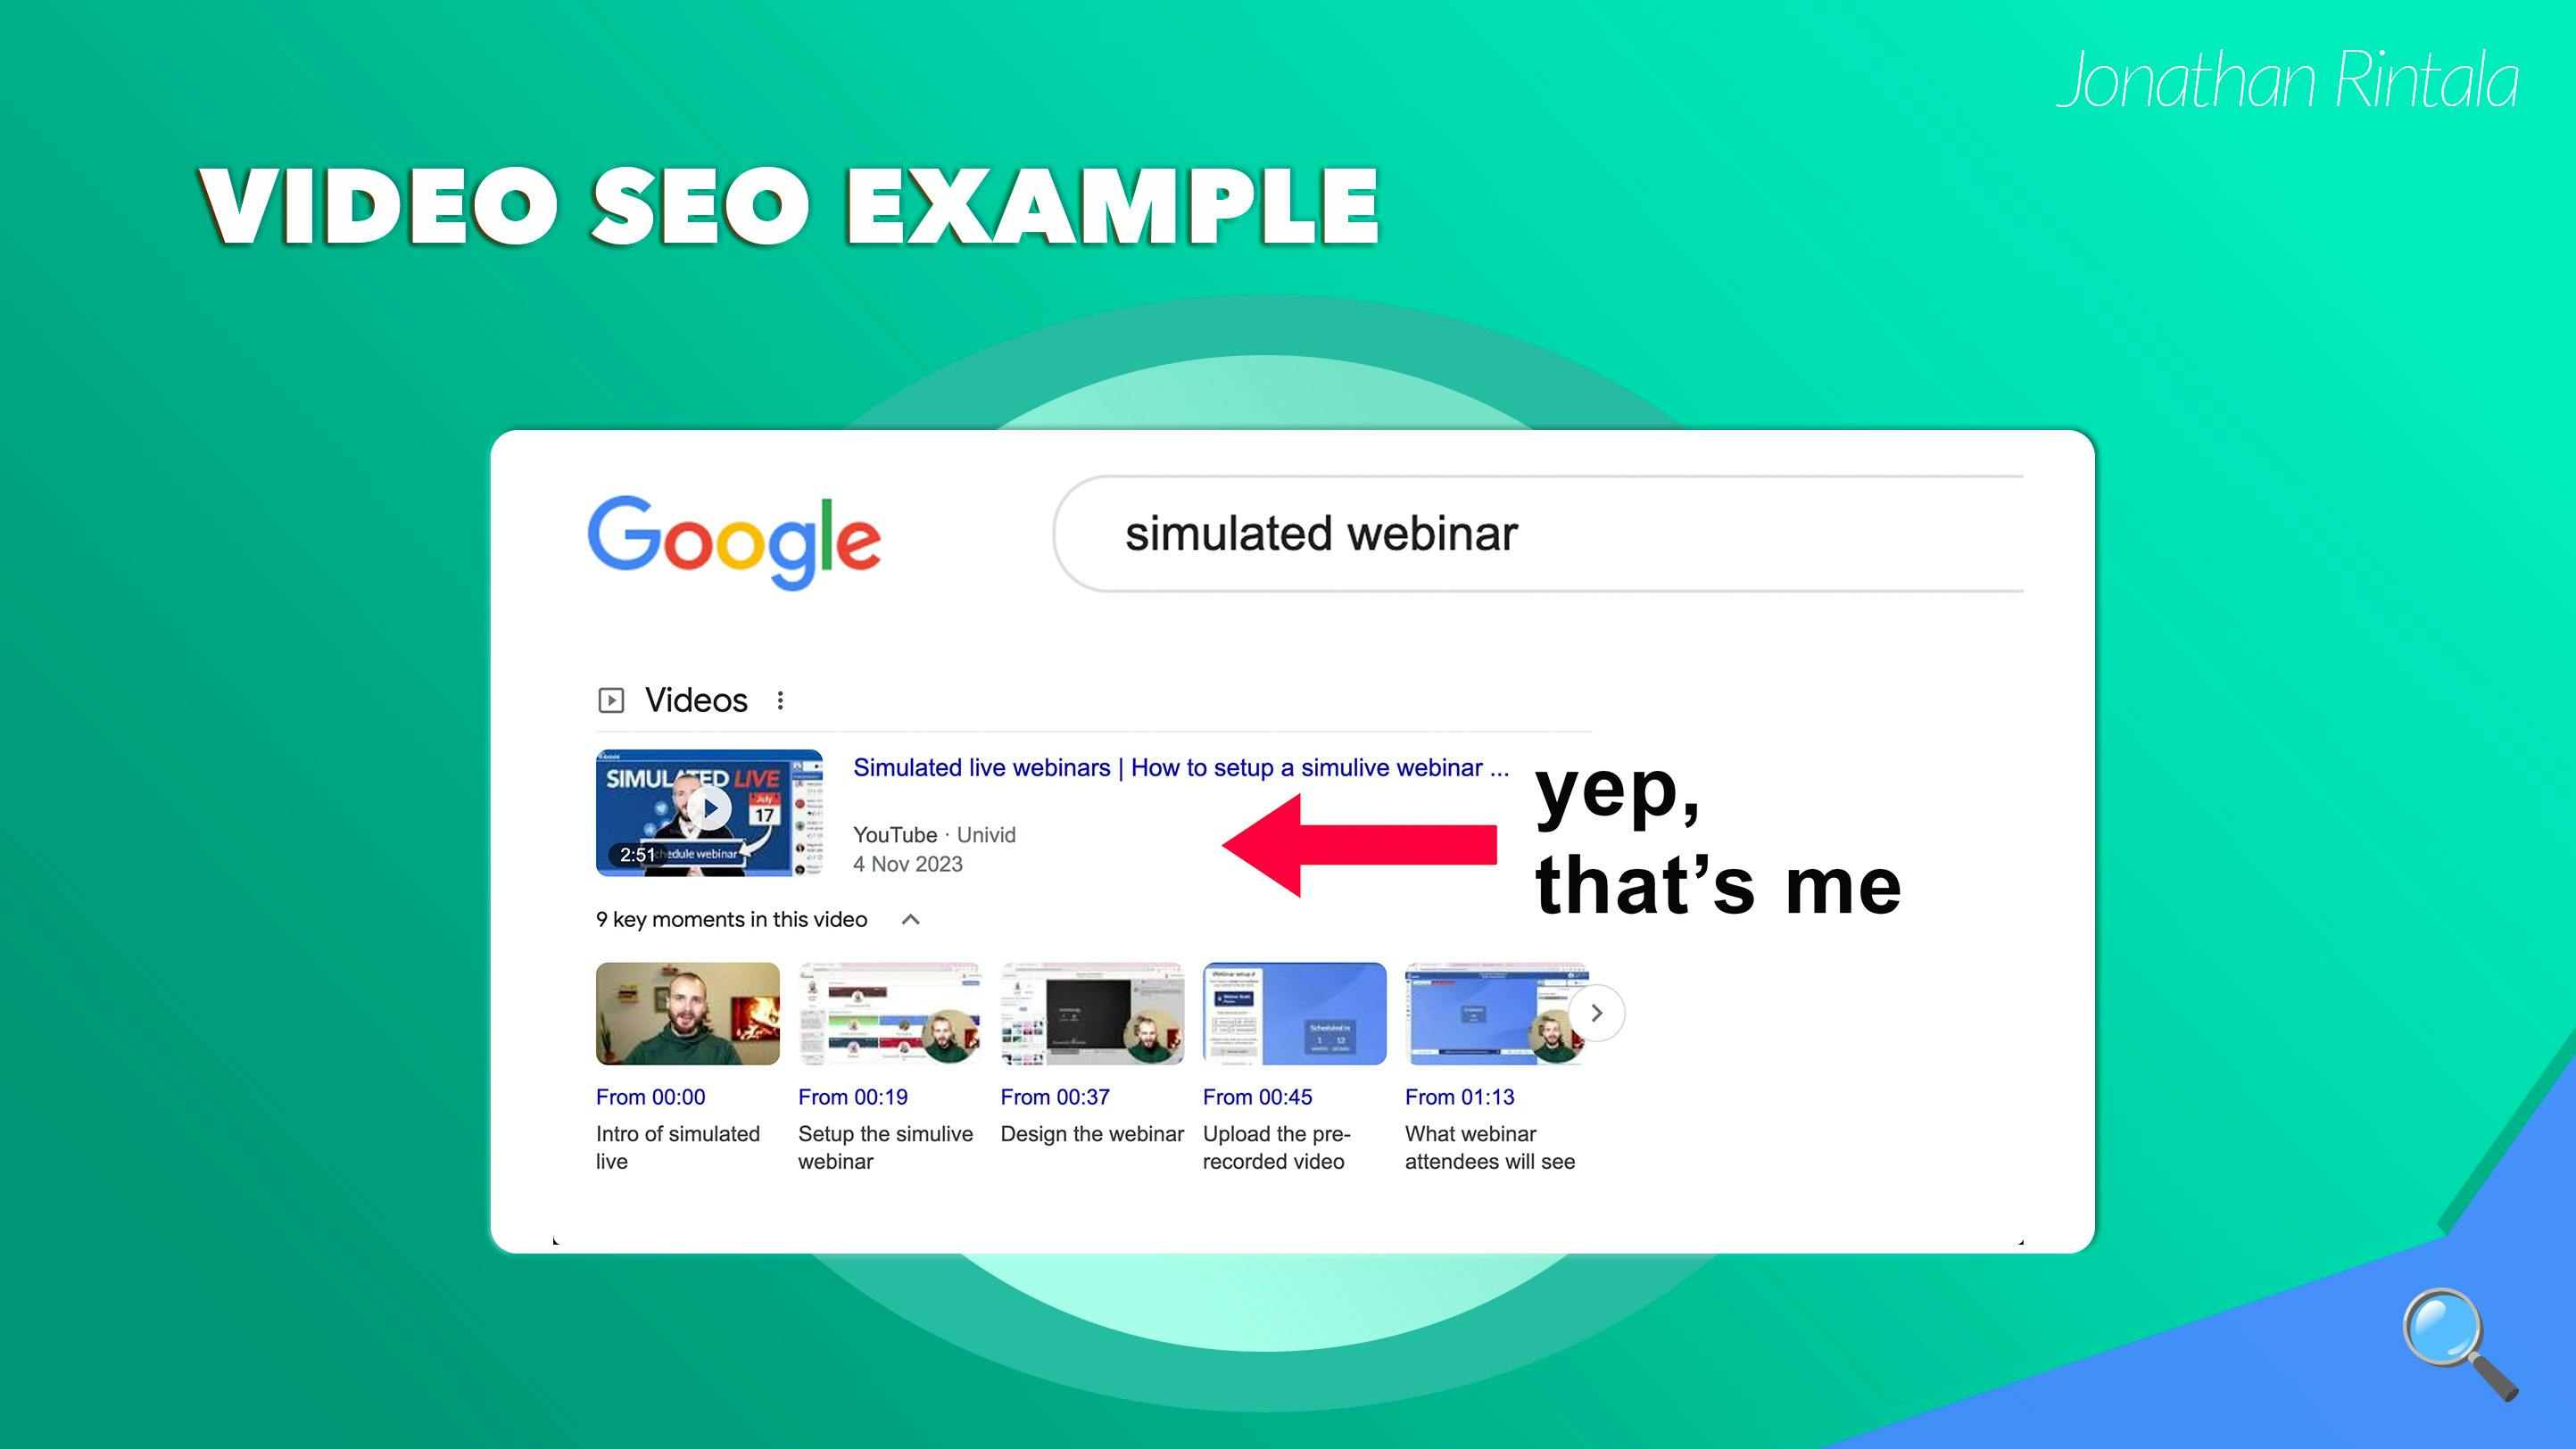 Video SEO Example - Rank on the SERP with Youtube videos